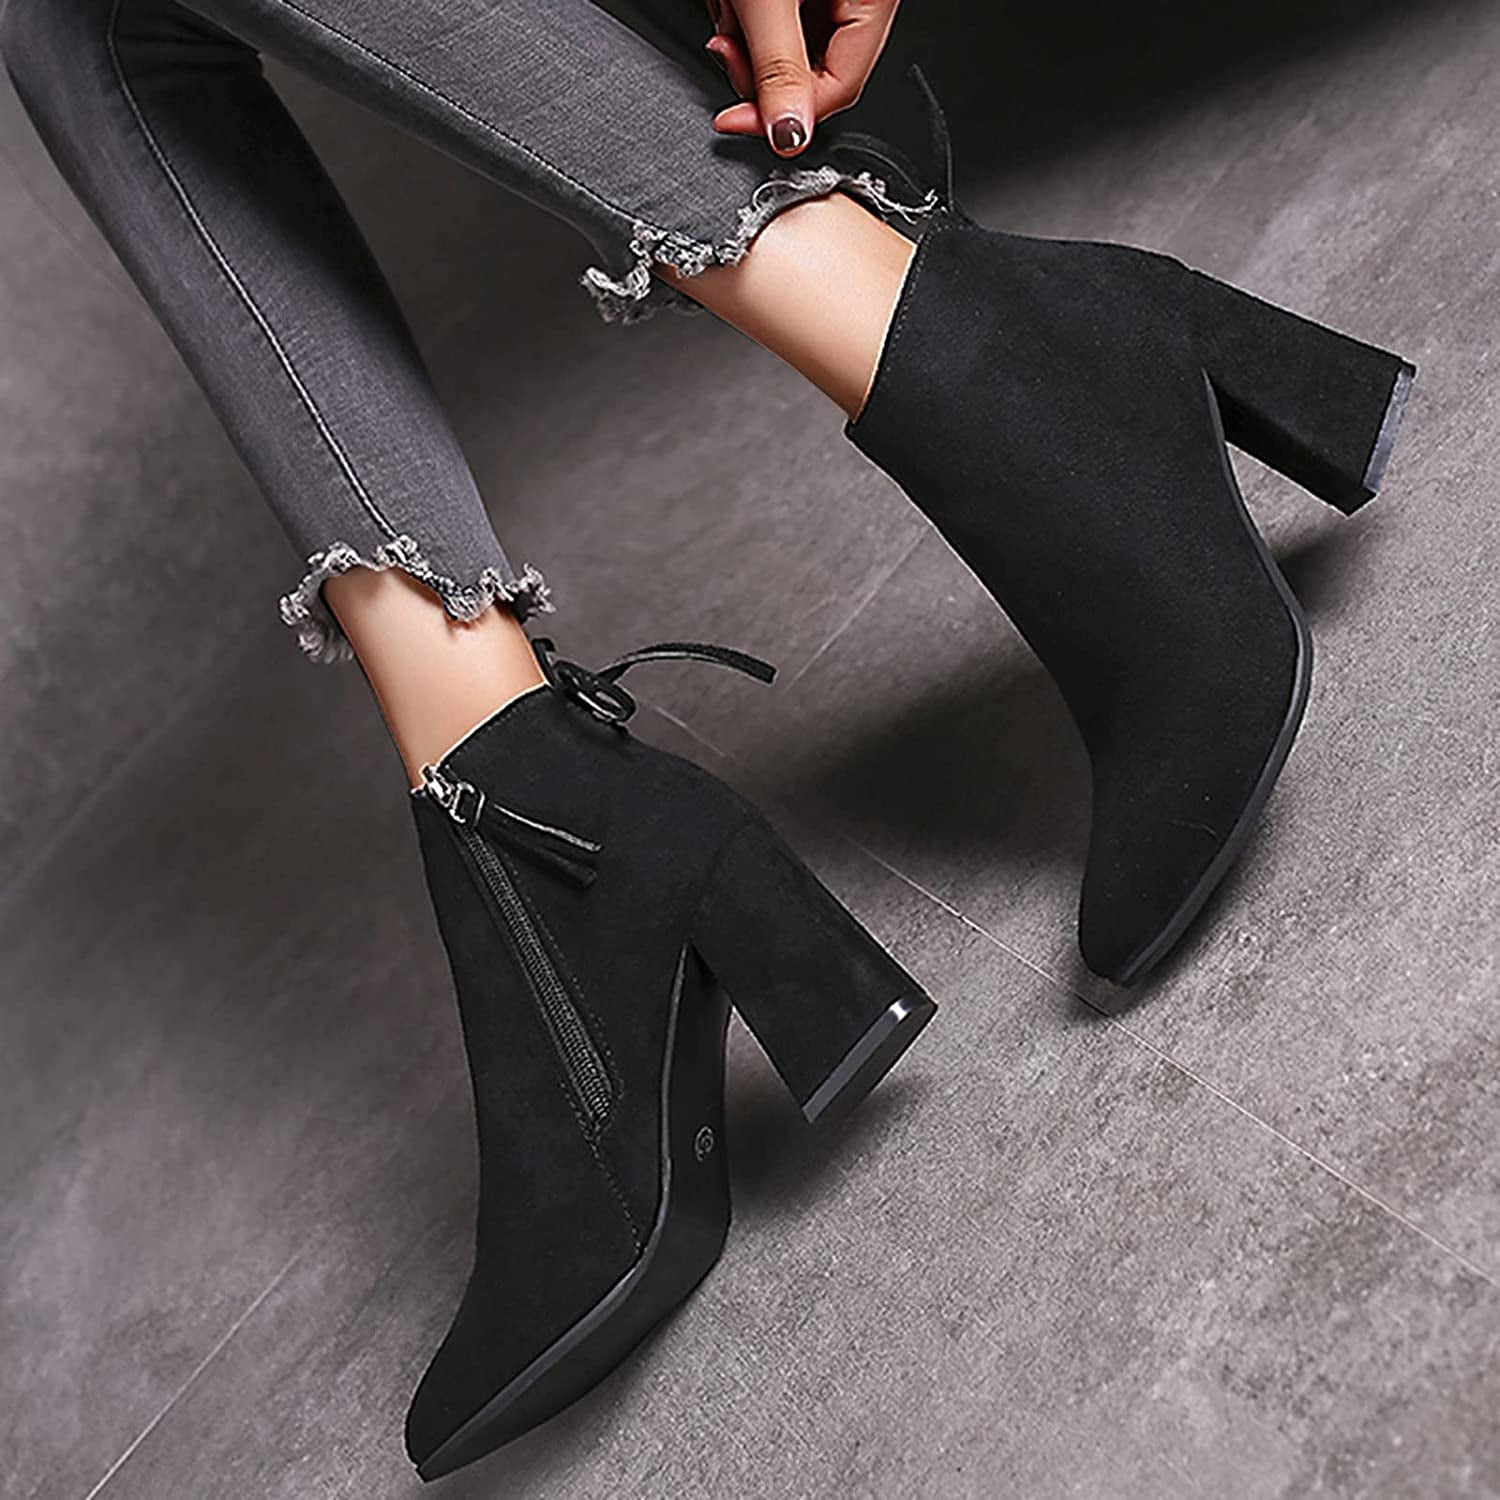 Women's fashion pointed toe back zipper mid calf block heel boots party shoes 